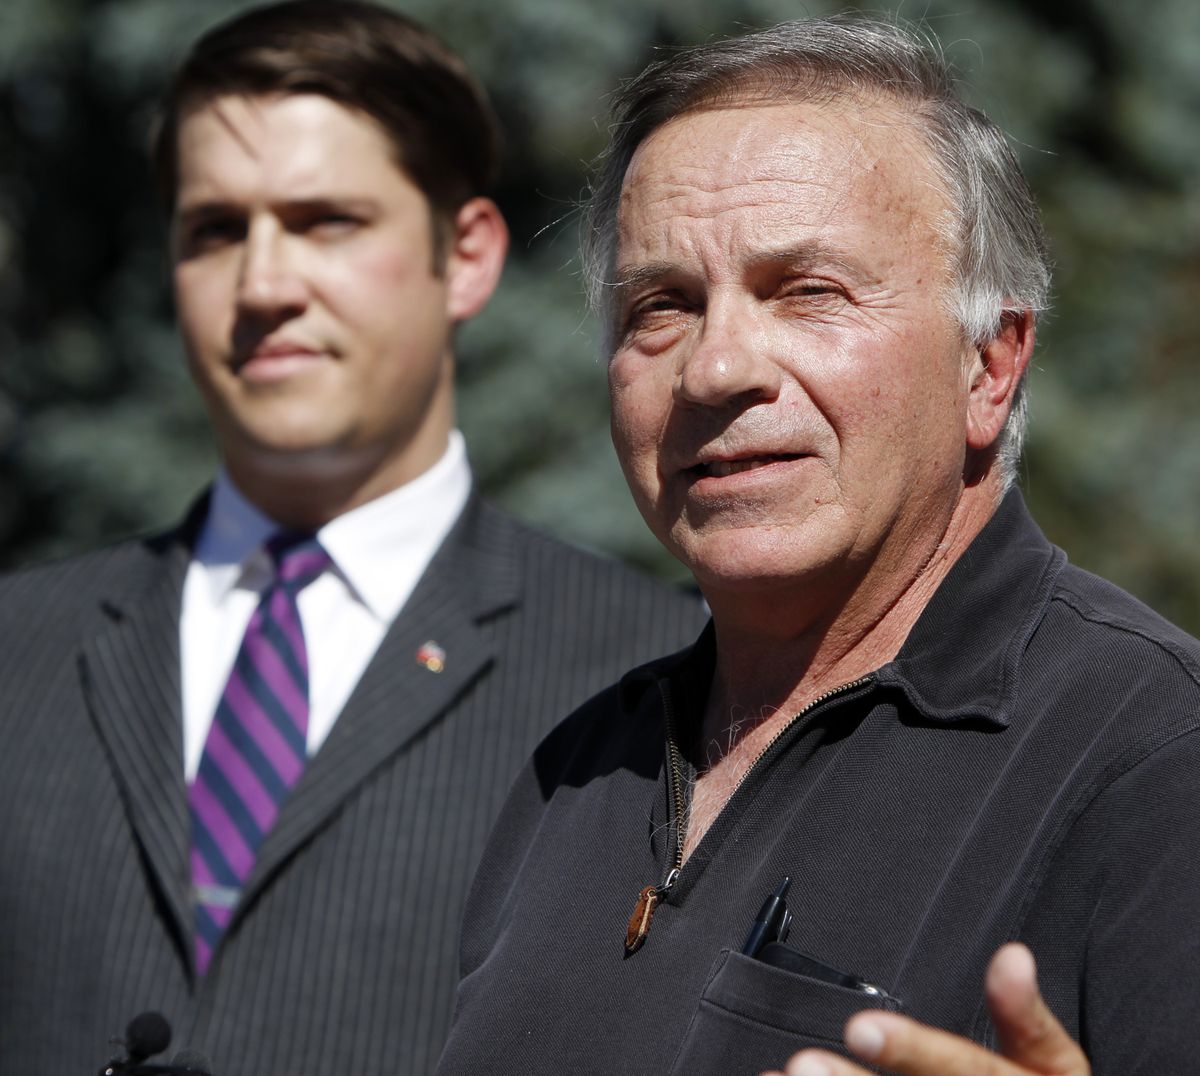 In this Oct. 2, 2012 photo, former Republican U.S. Rep. Tom Tancredo speaks out in favor supporting Amendment 64 to legalize marijuana in Colorado during a news conference at the Capitol in Denver. Joe Megyesy coordinator for the campaign to regulate marijuana like alcohol listens at left. Appealing to Western individualism and a mistrust of federal government, activists have lined up some prominent conservatives as natural allies to make pot legal, from one-time presidential hopefuls Tom Tancredo and Ron Paul to Libertarian presidential candidate and former New Mexico Gov. Gary Johnson. (Ed Andrieski / Associated Press)